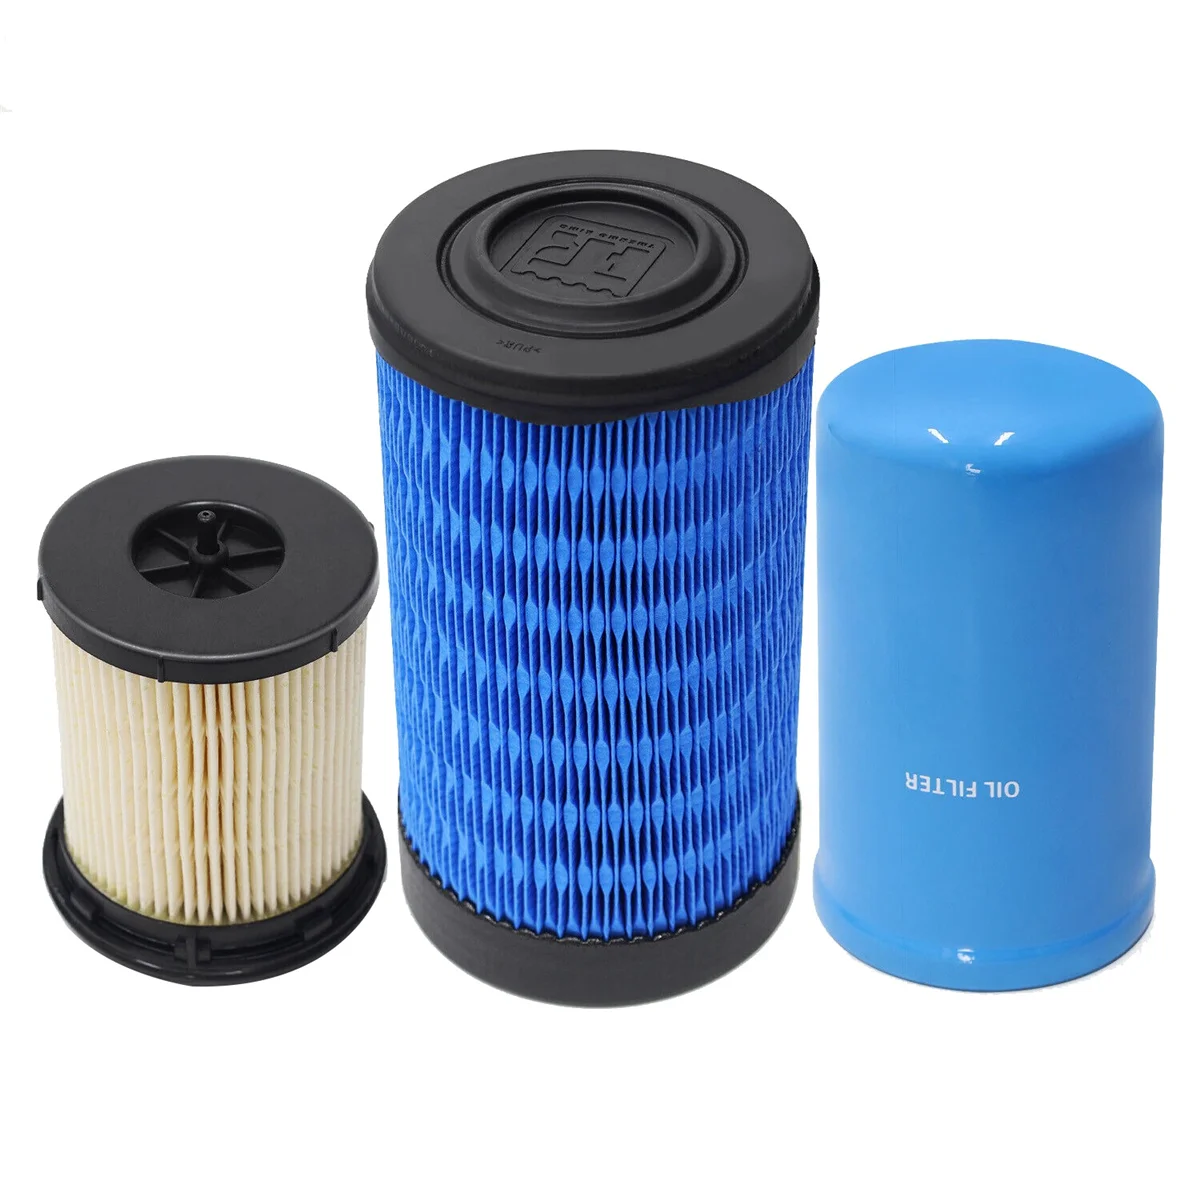 

3PCS Oil Filter+Air Filter+Fuel Filter Change PM Kit for Thermo King Precedent S600 C600 S700 11-9959 11-9965 11-9955